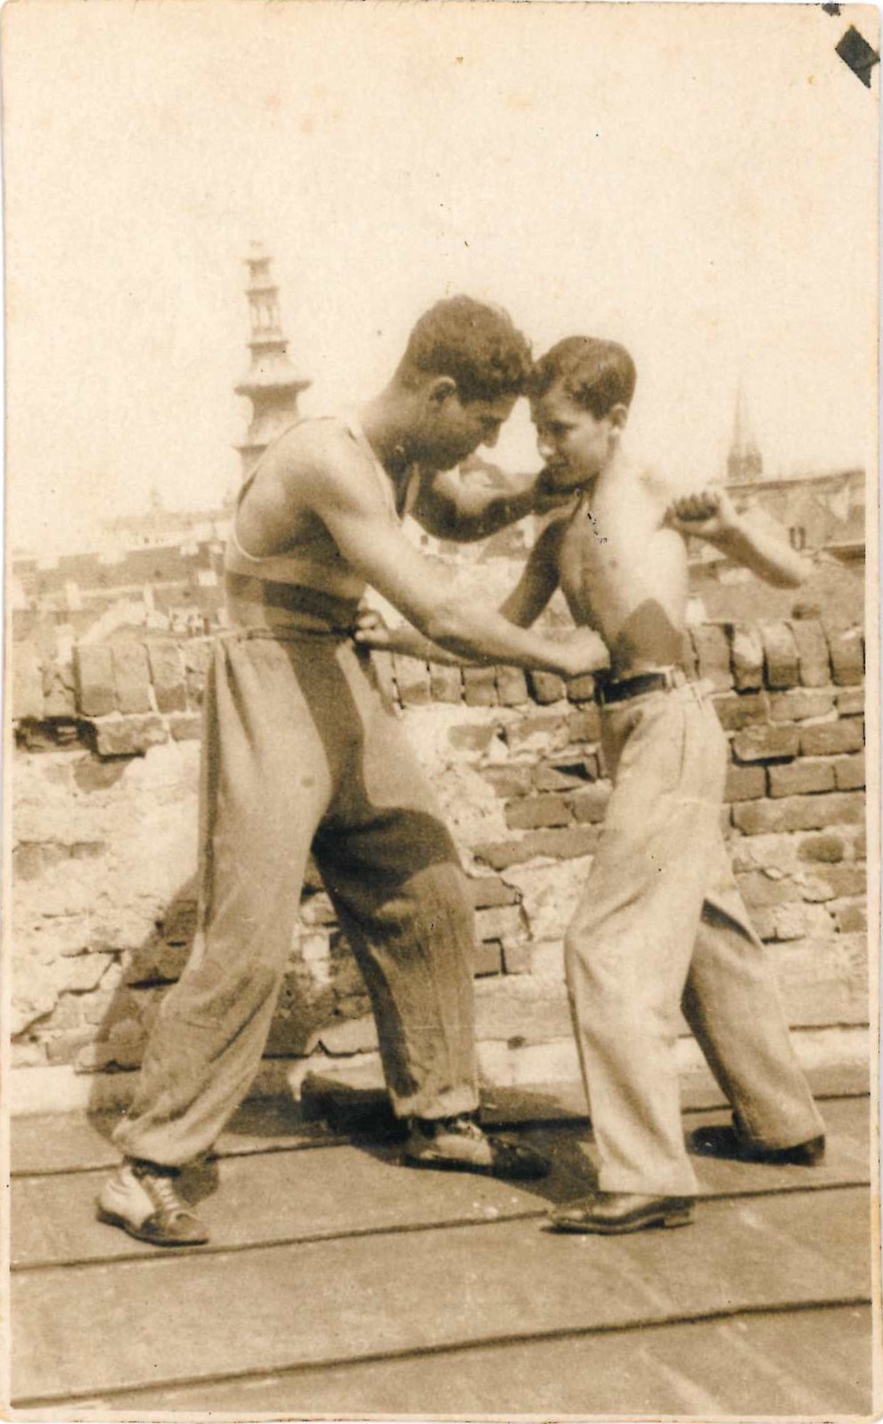 Wrestling demonstration with a younger boy, Bratislava, 1920s